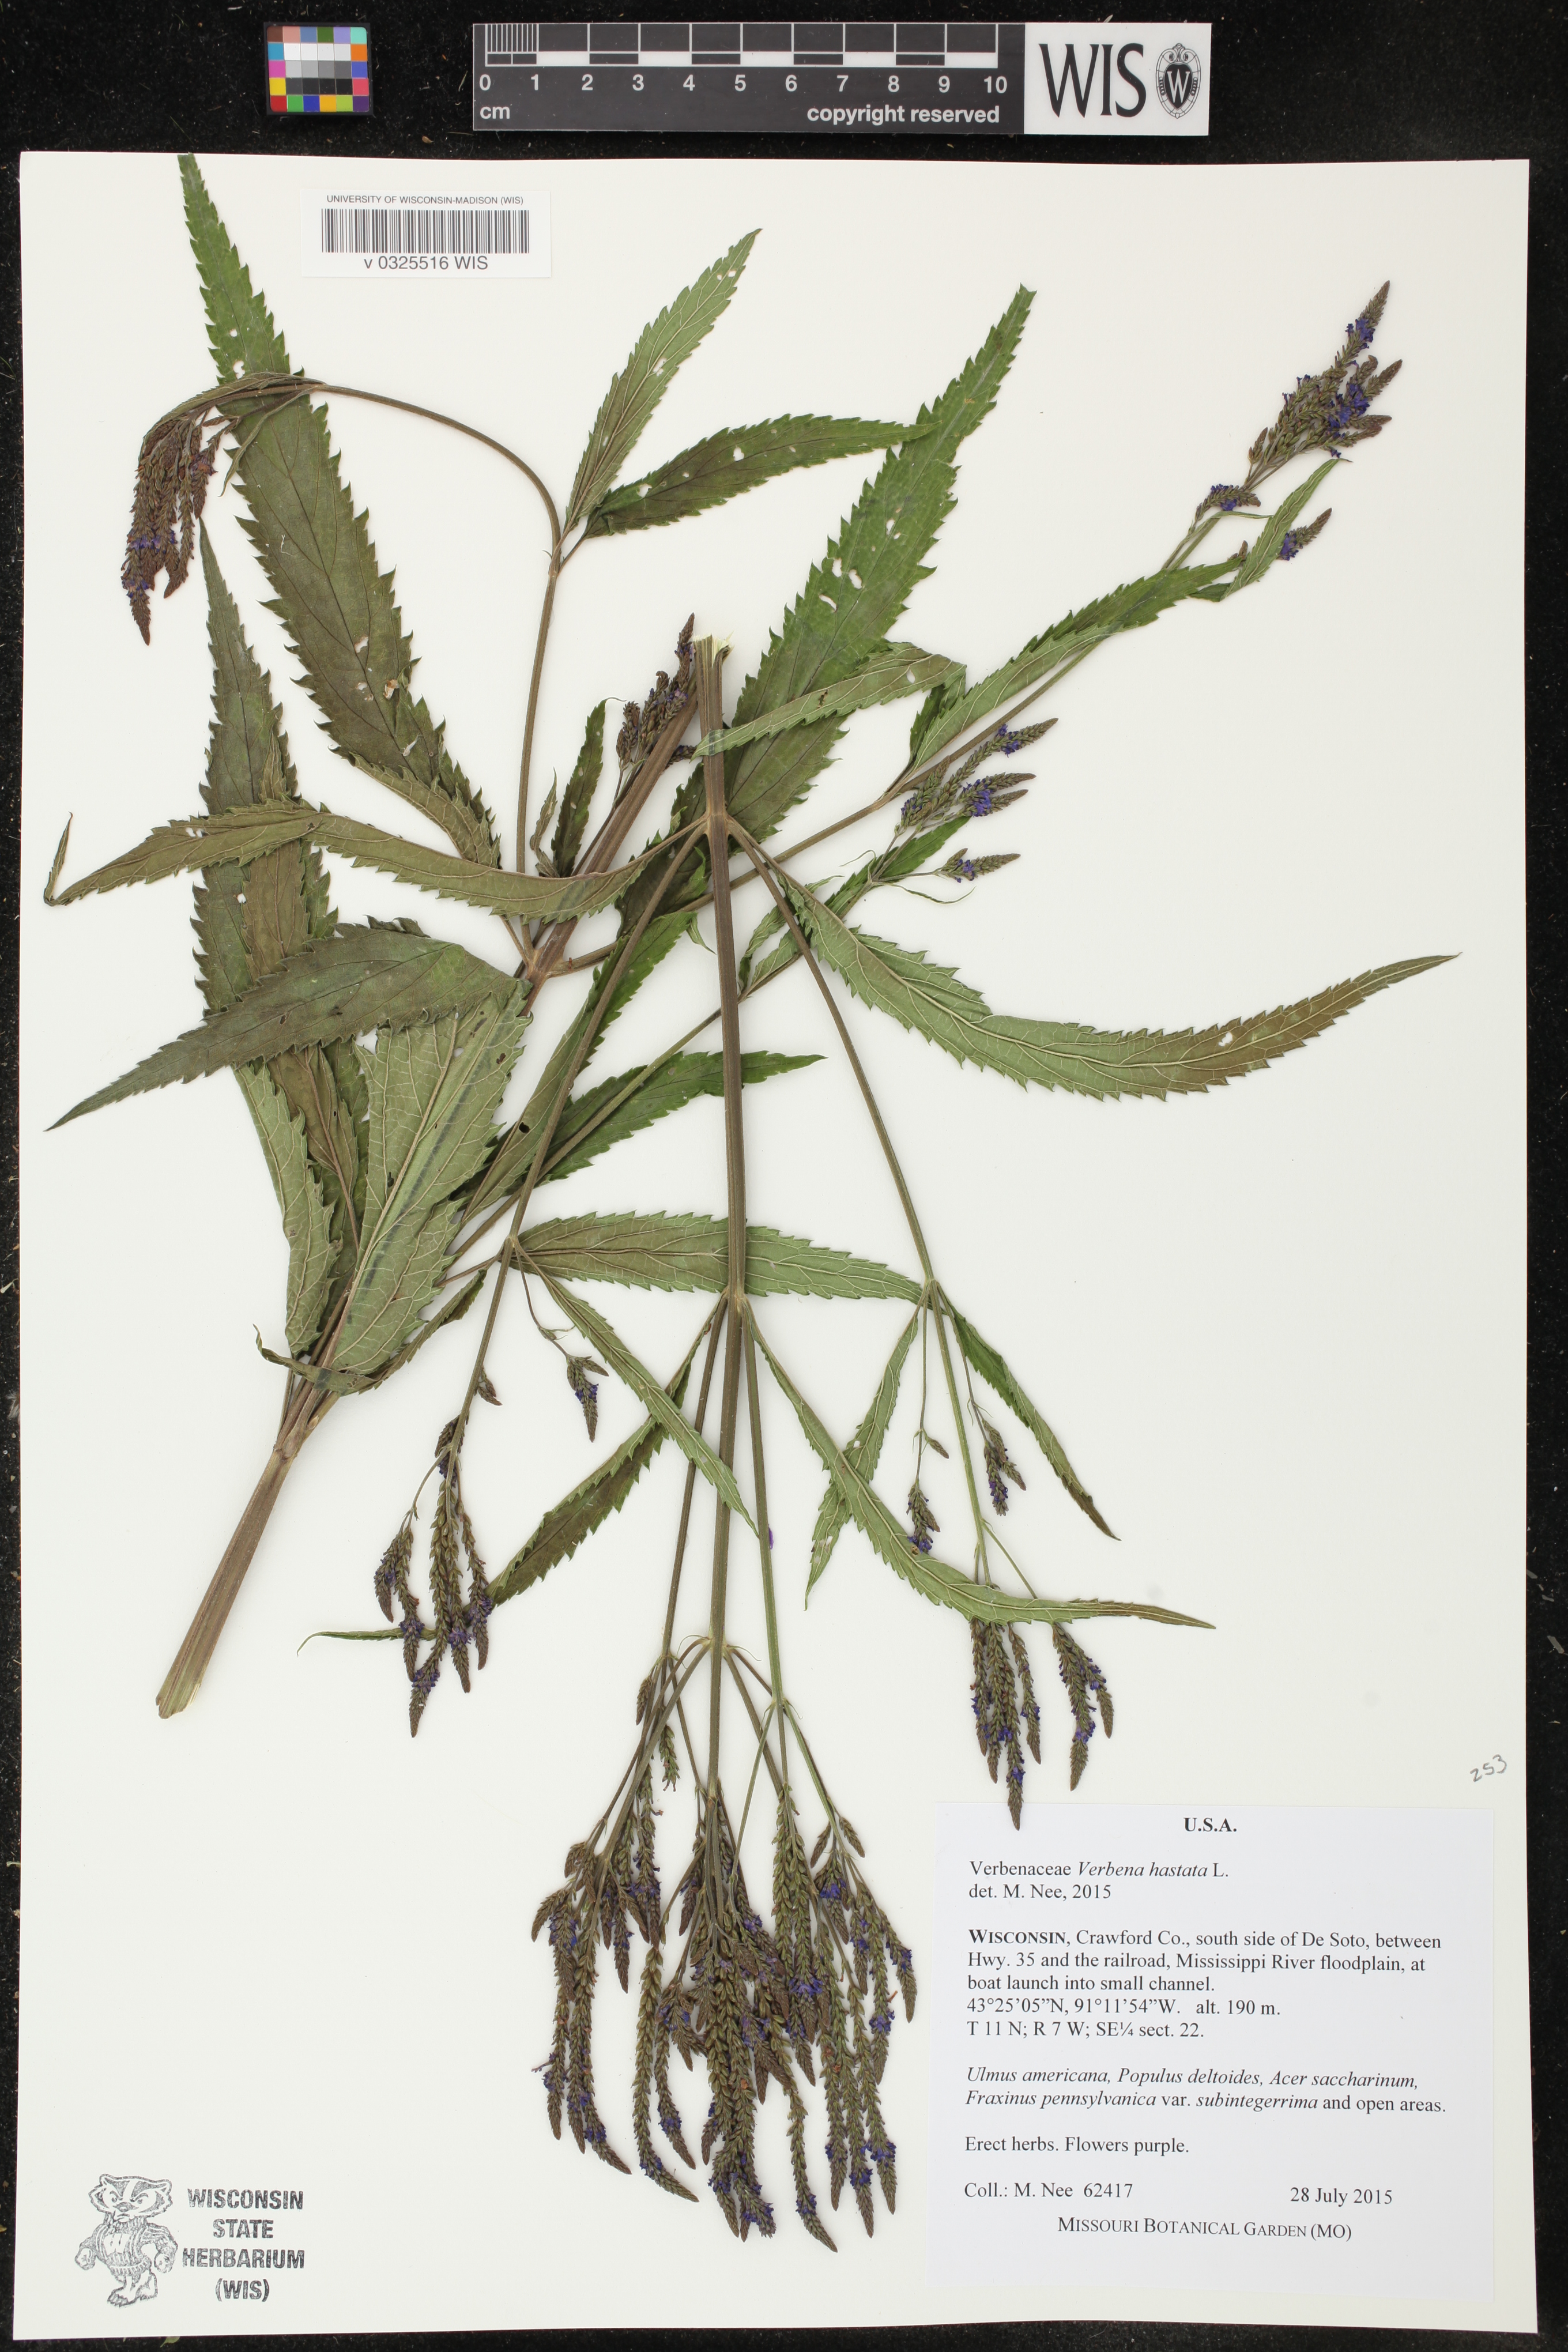 Blue Vervain specimen collected in Crawford County on July 28, 2015.